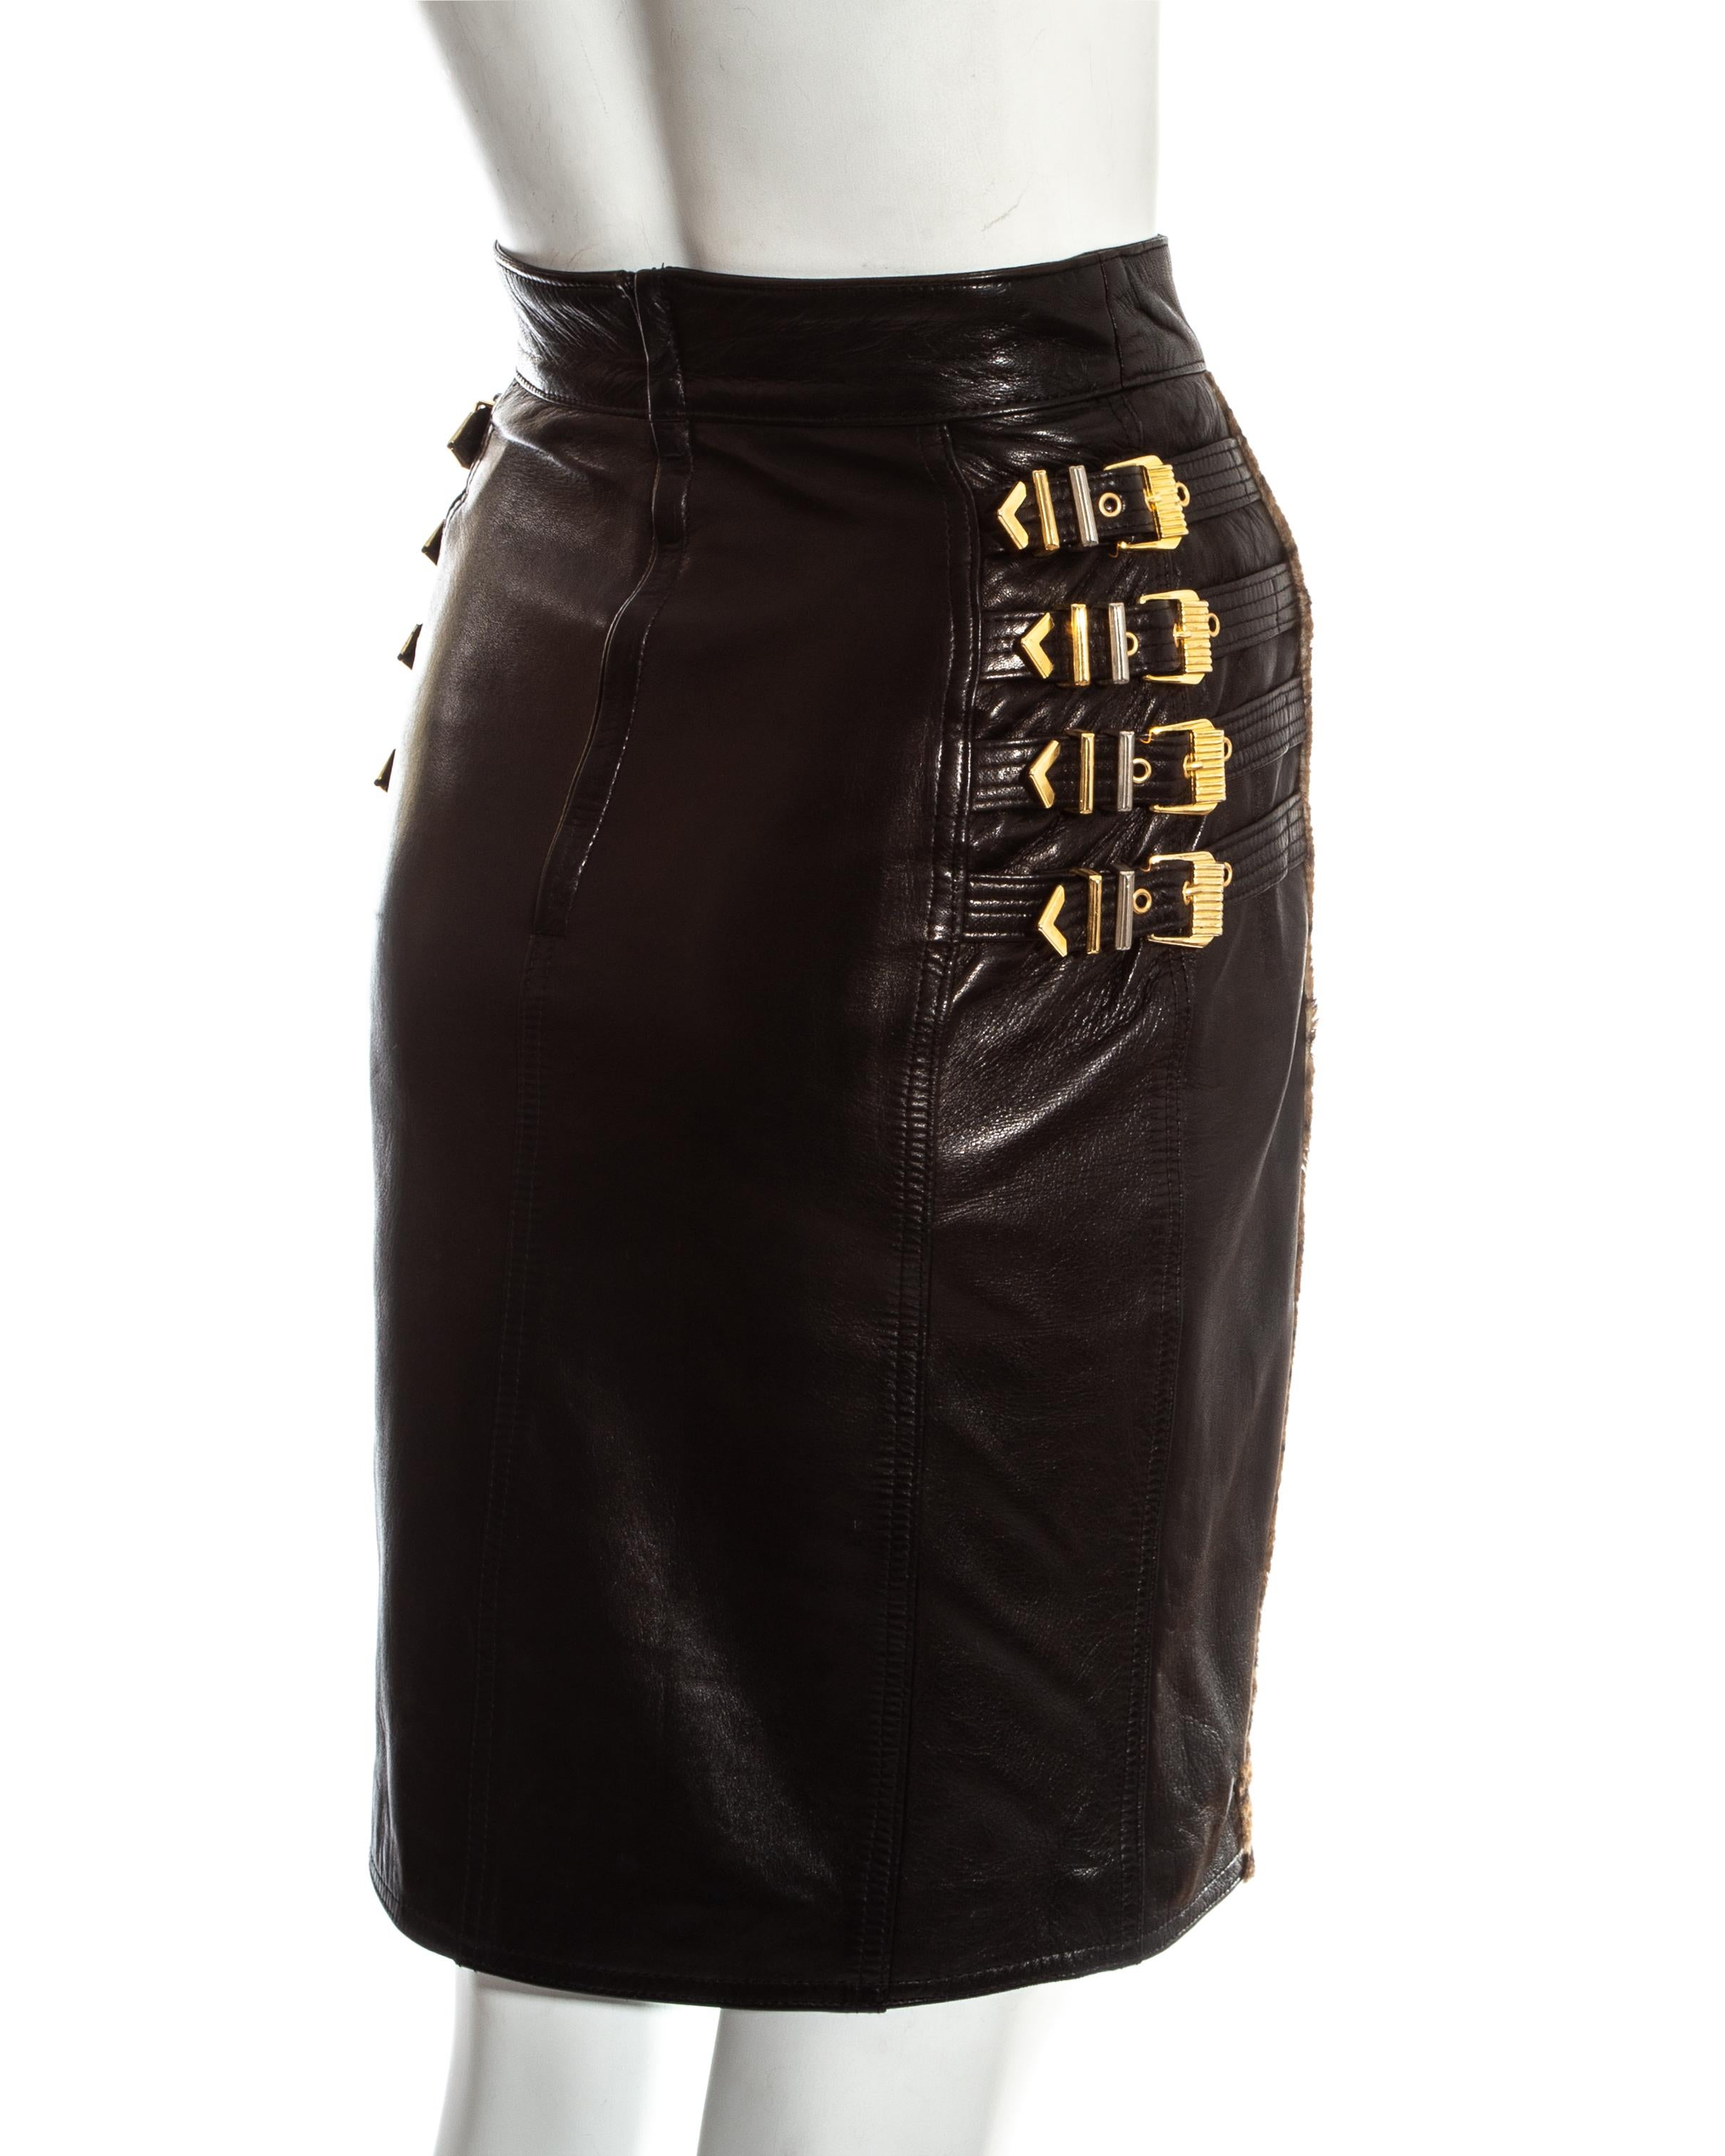 Gianni Versace black leather gold buckled skirt with animal print, fw 1994 In Good Condition For Sale In London, GB